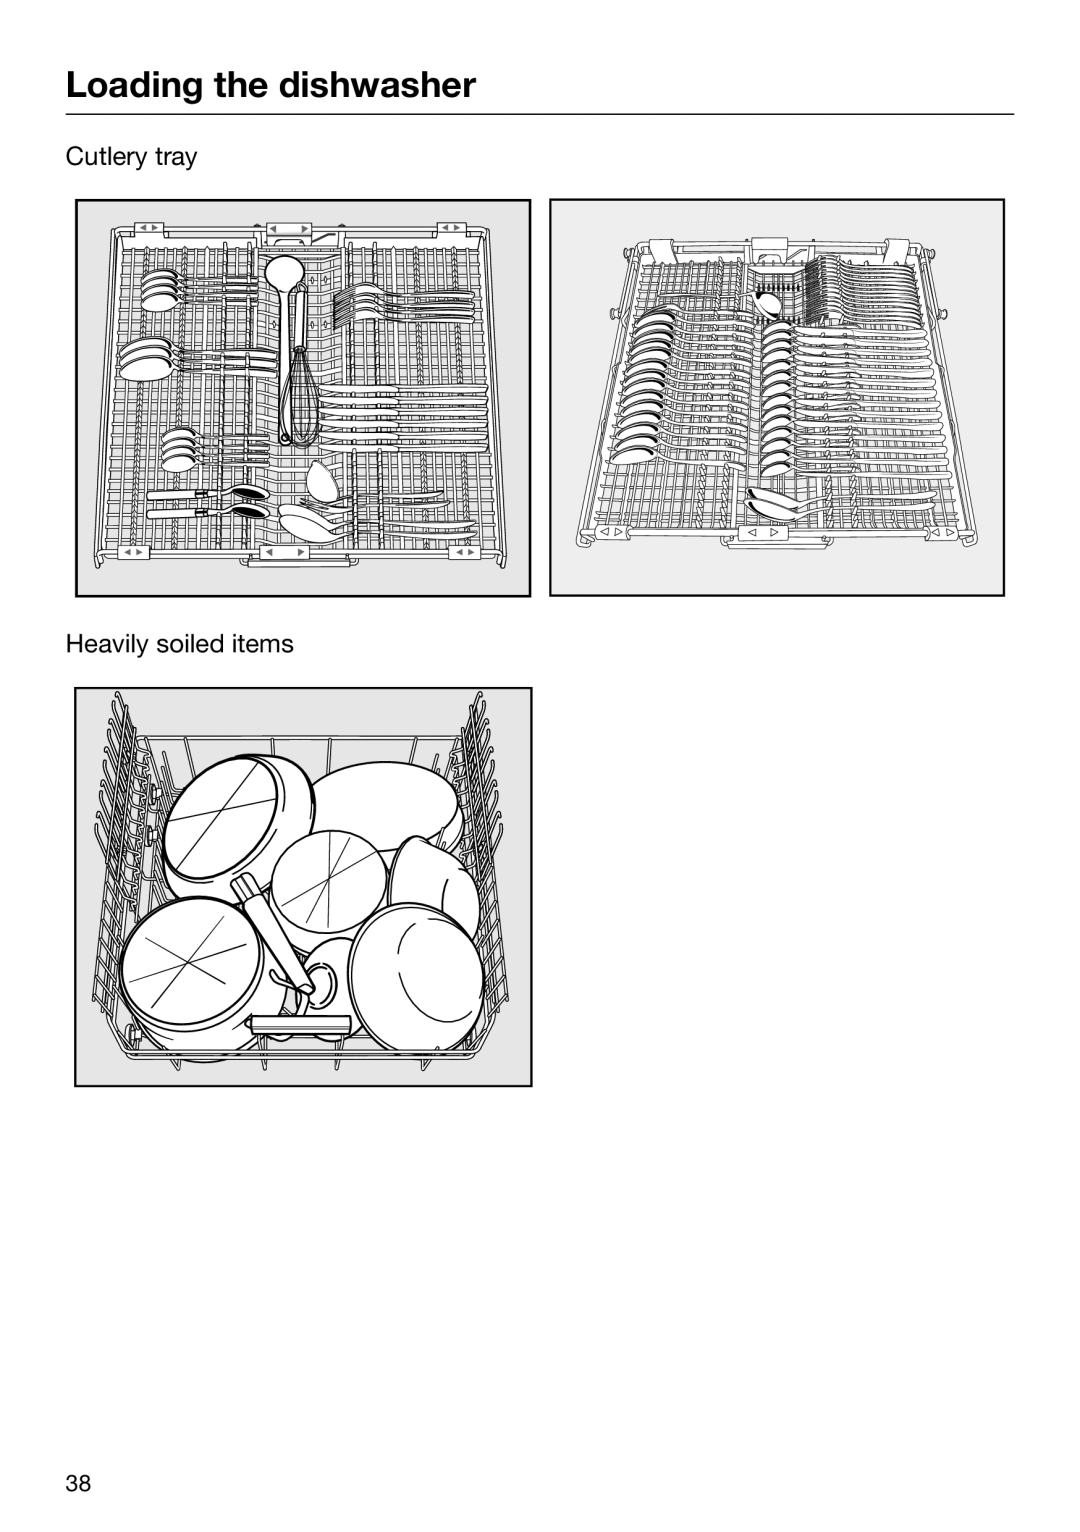 Miele 09 645 470 manual Loading the dishwasher, Cutlery tray Heavily soiled items 